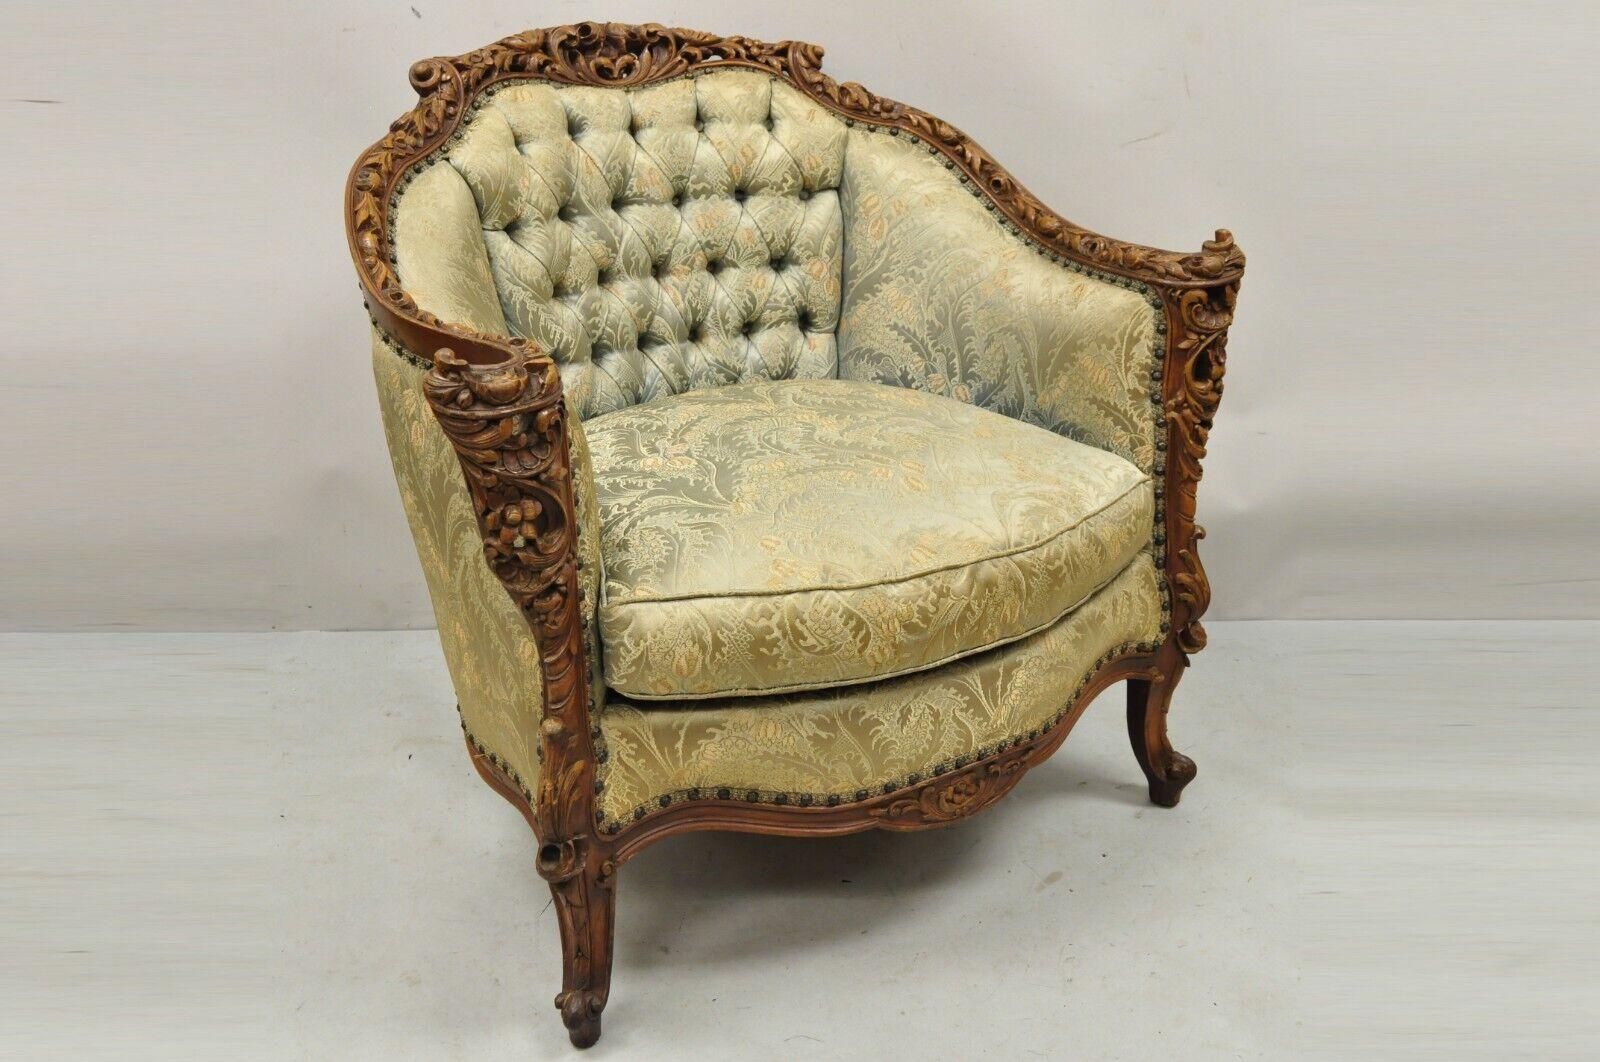  Antique French Louis XV Style Flower Carved Walnut Green Club Lounge Chair. Item features an ornately carved floral frame, solid wood construction, beautiful wood grain, nicely carved details, cabriole legs, very nice antique item, great style and